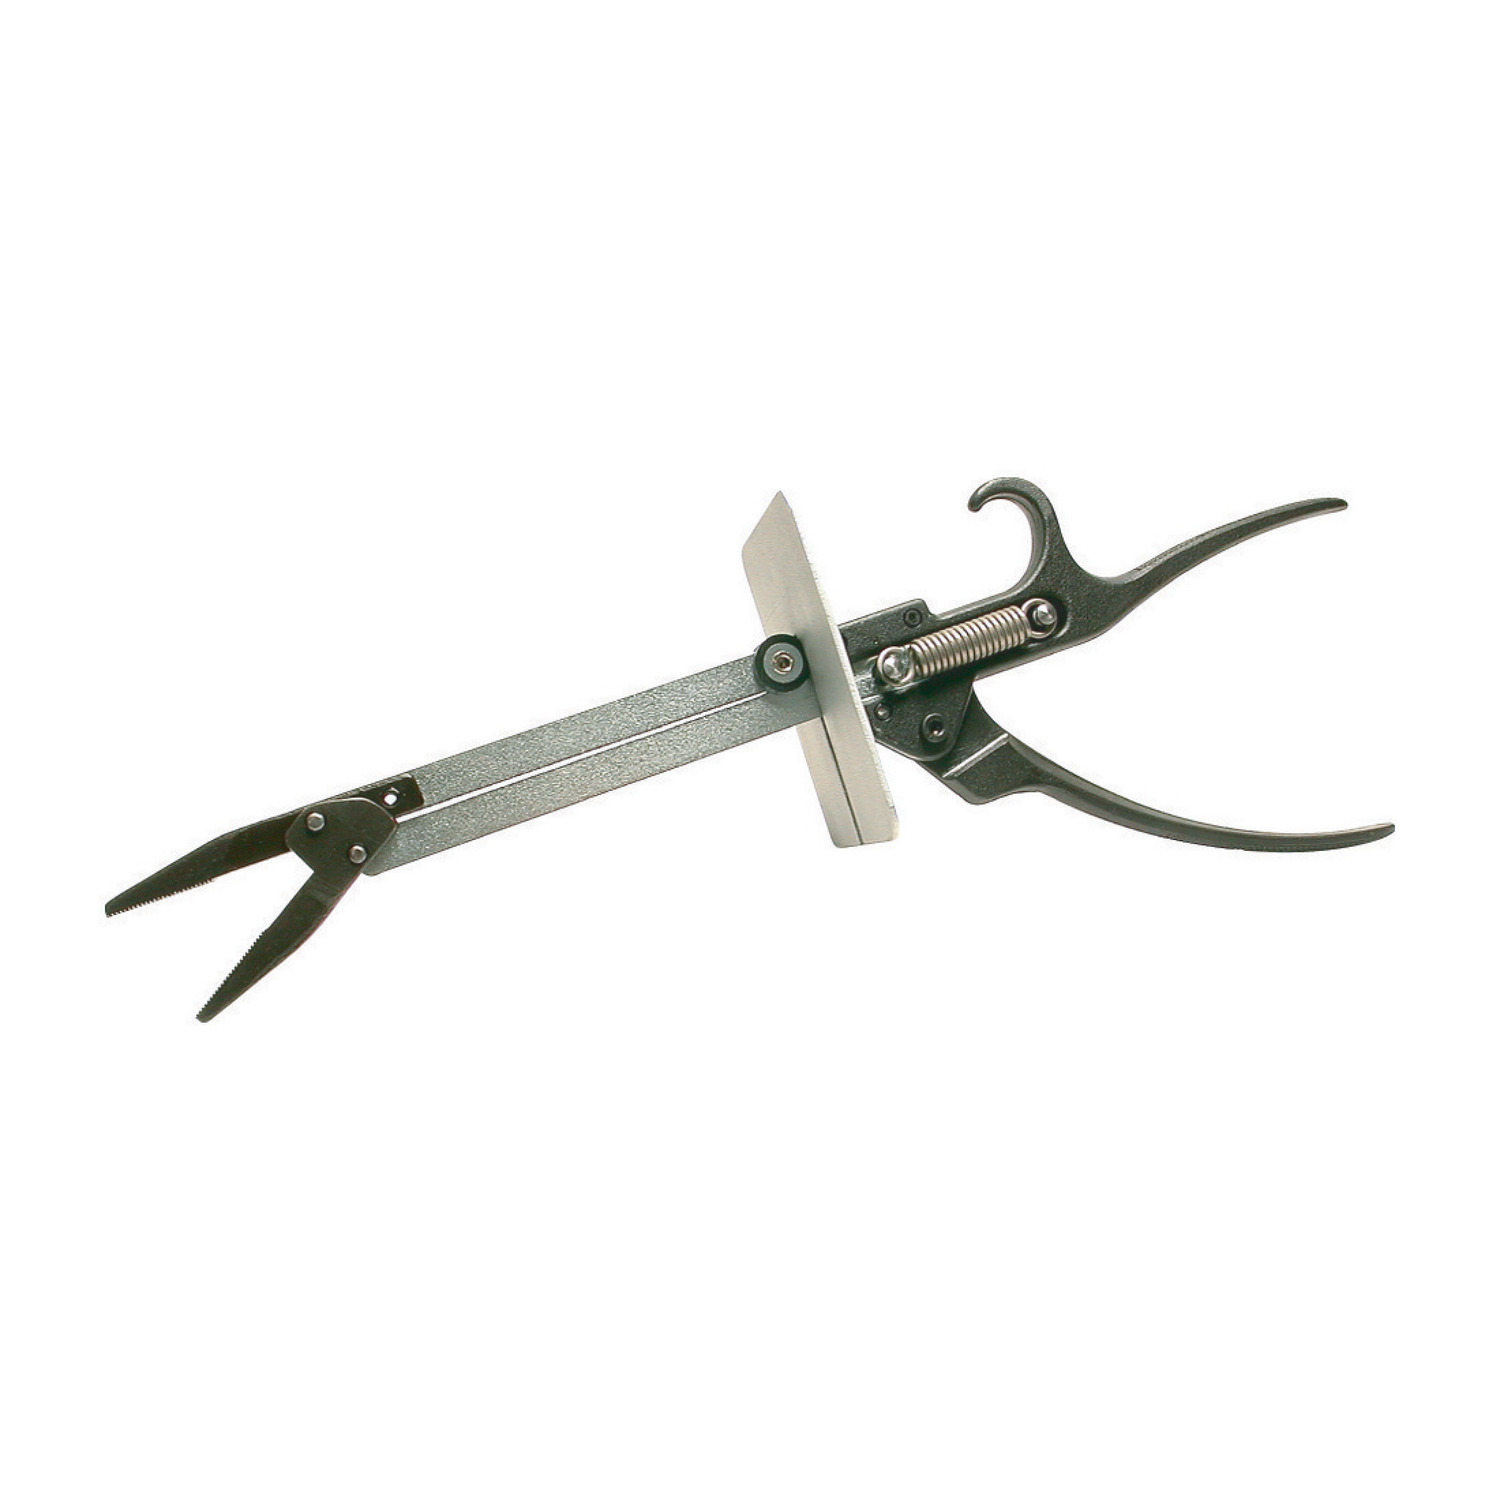 Product 97060, Chip Pincers with hand guard / 